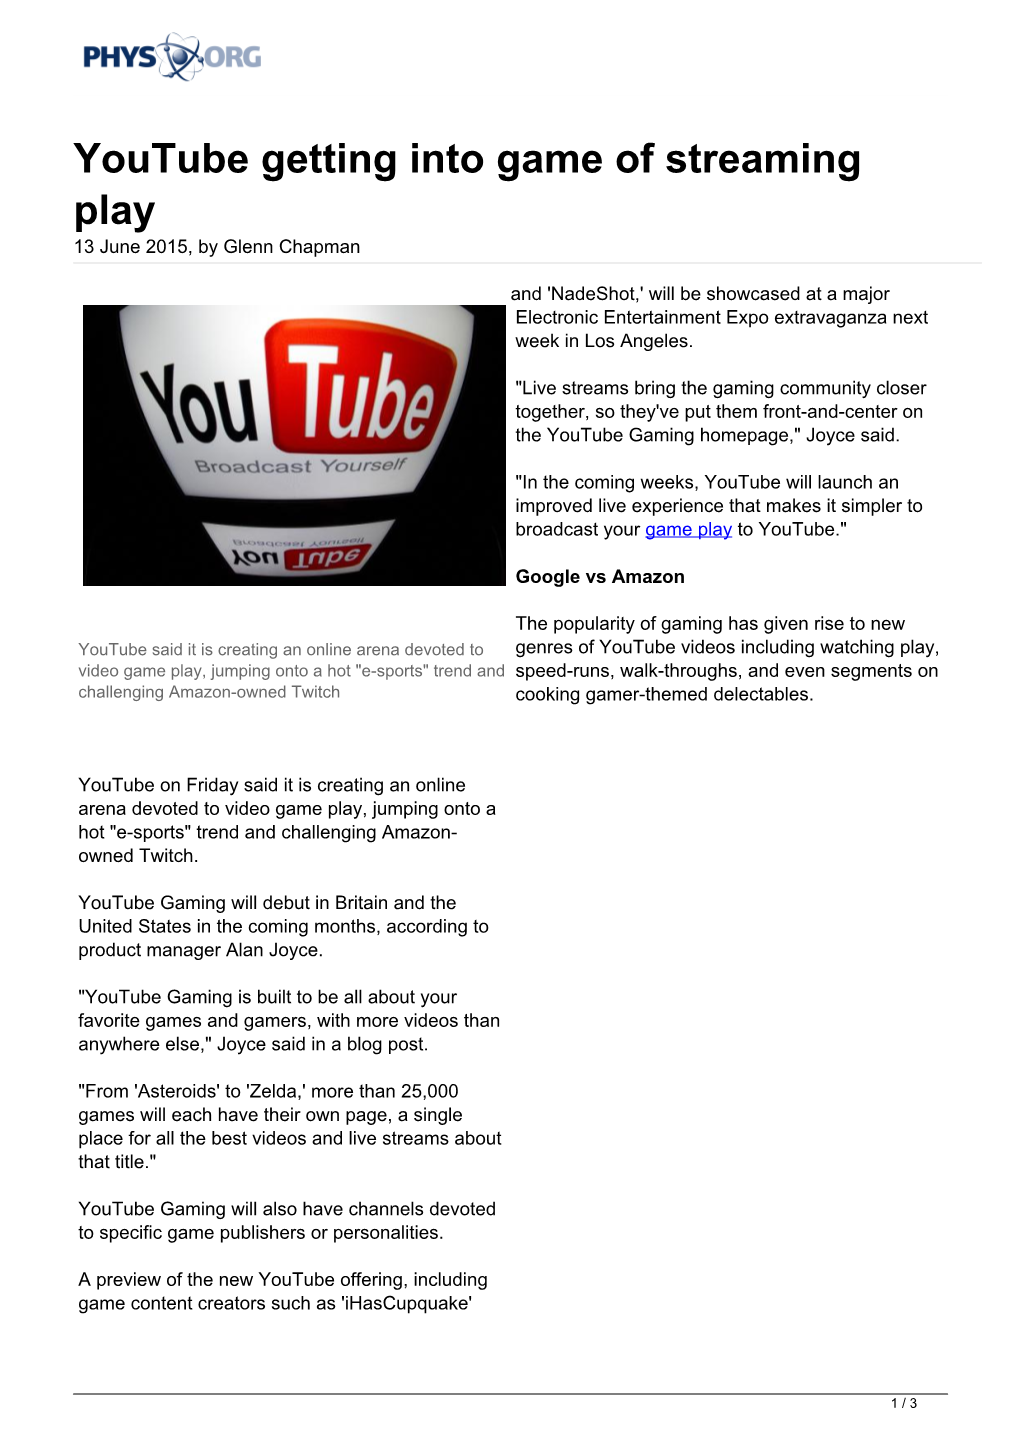 Youtube Getting Into Game of Streaming Play 13 June 2015, by Glenn Chapman